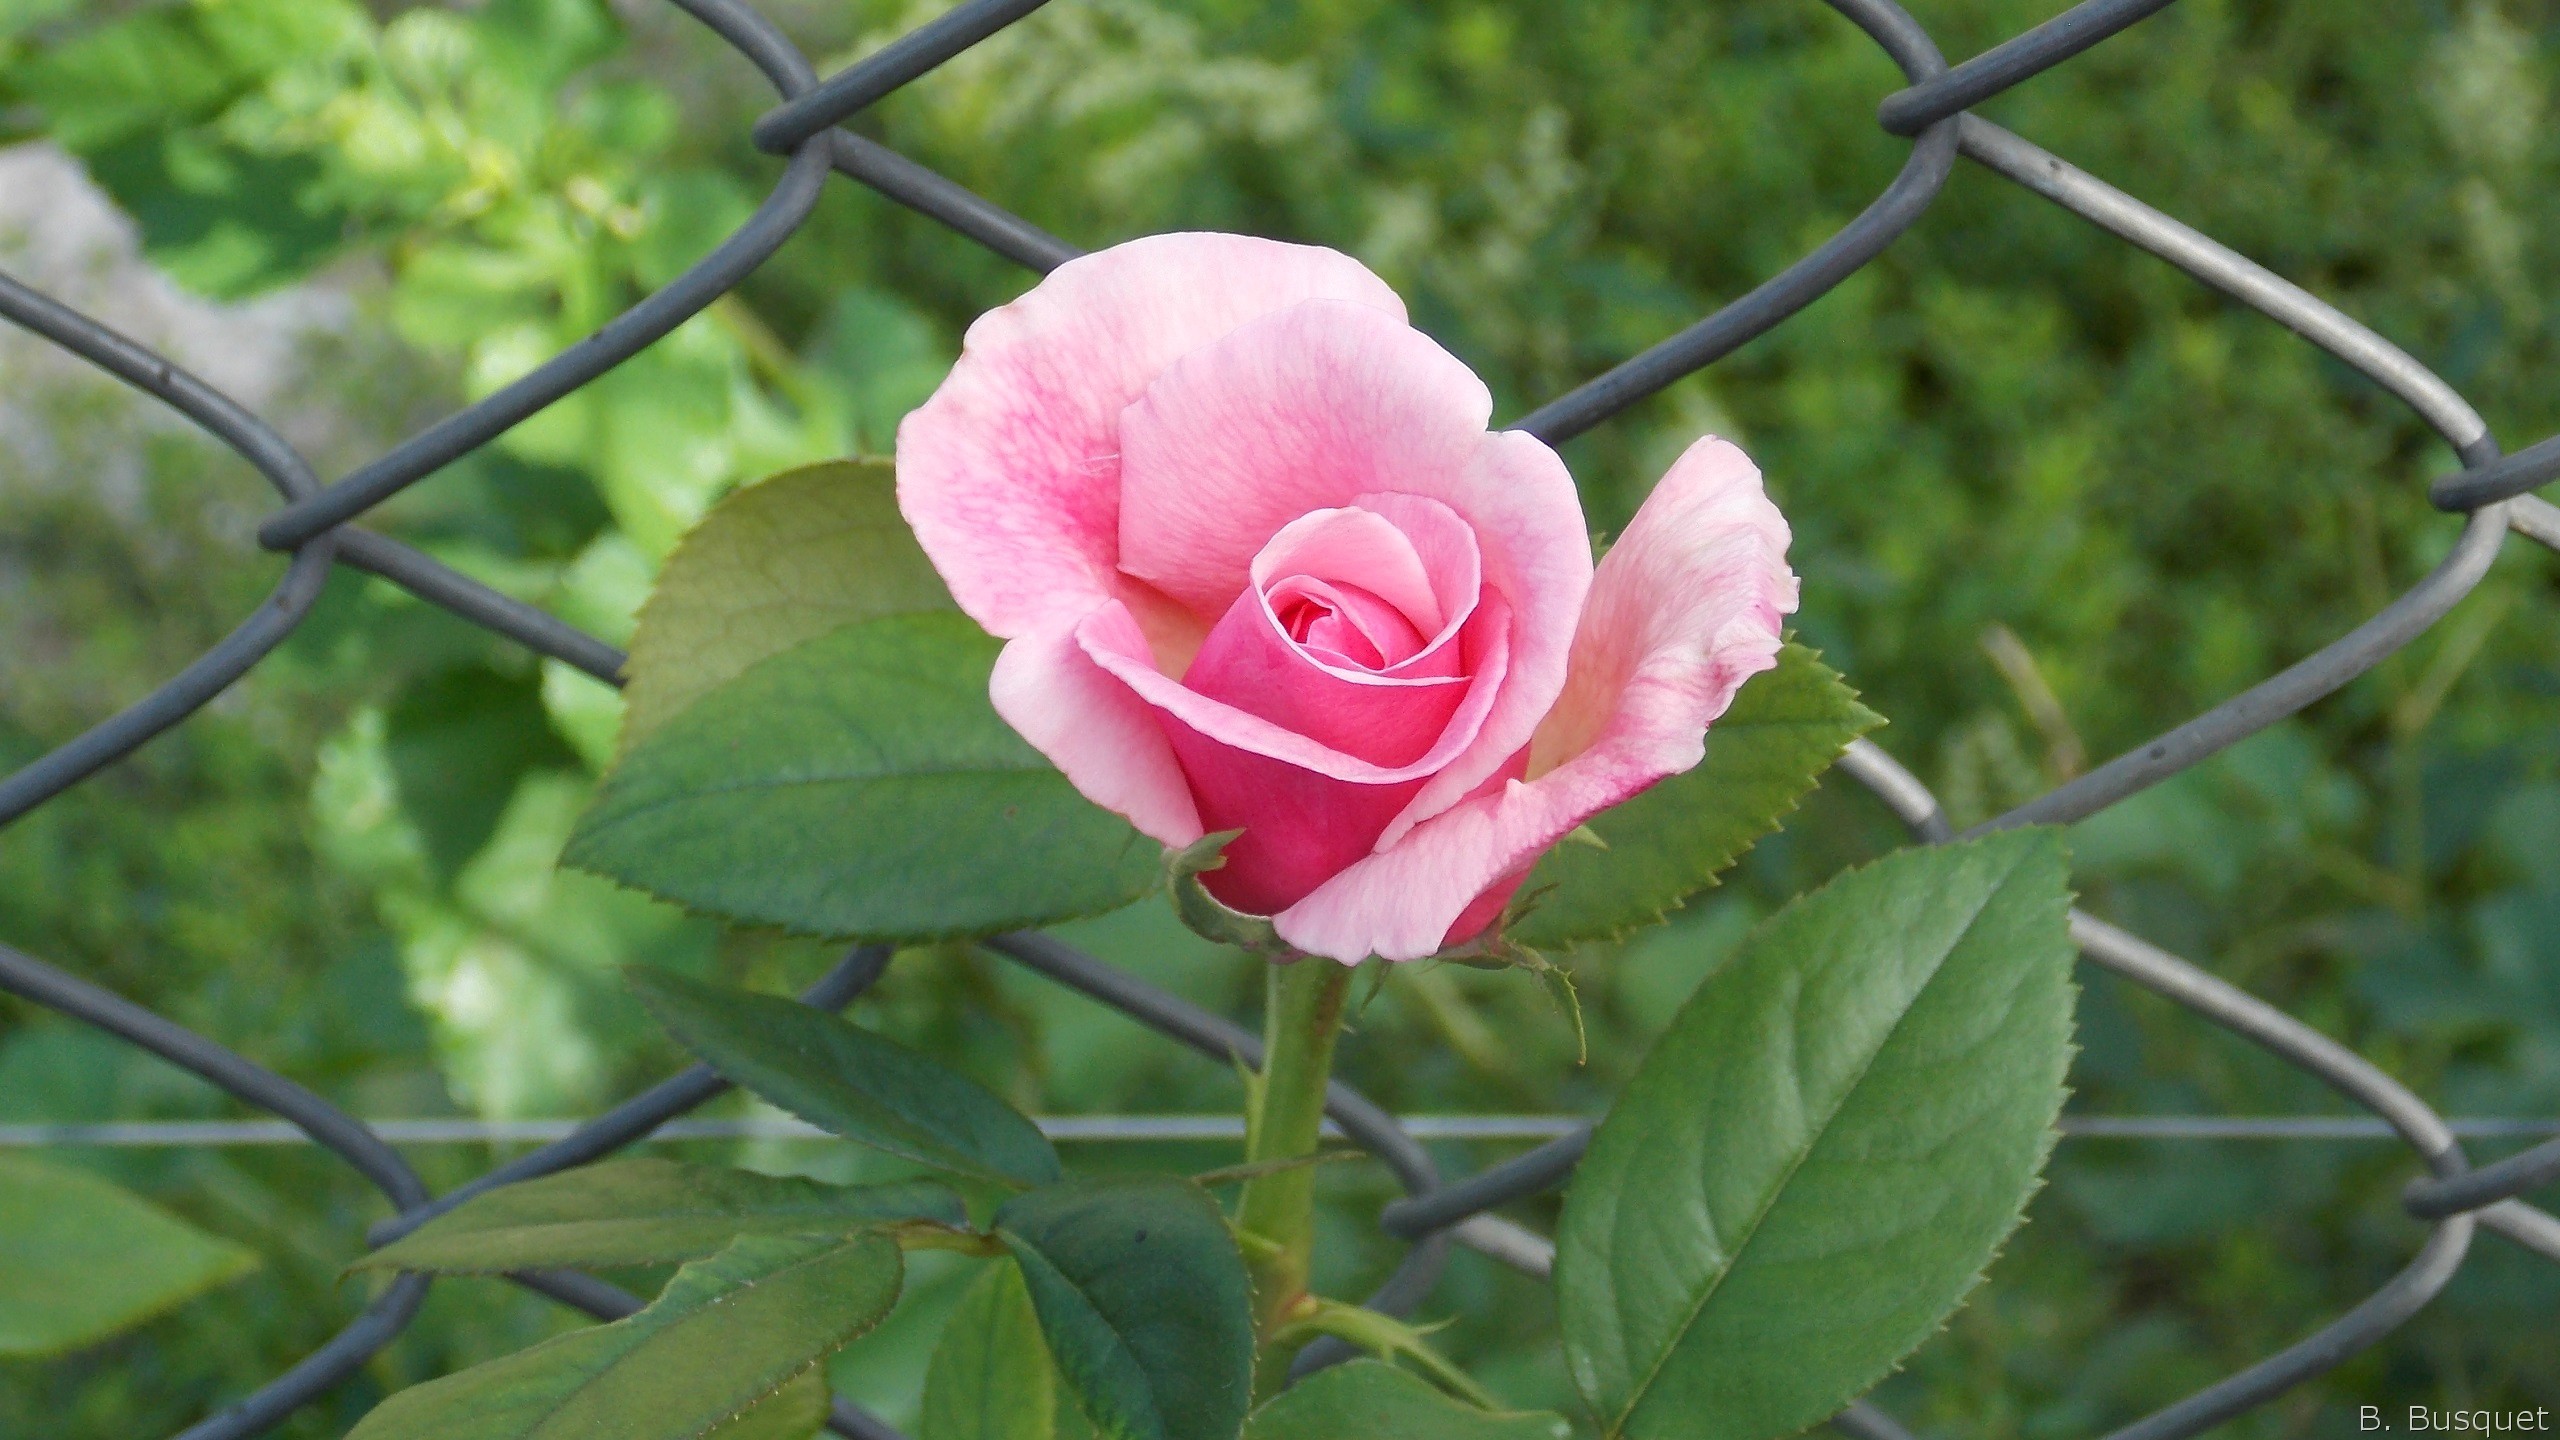 2560x1440 Mesh fence and a pink rose